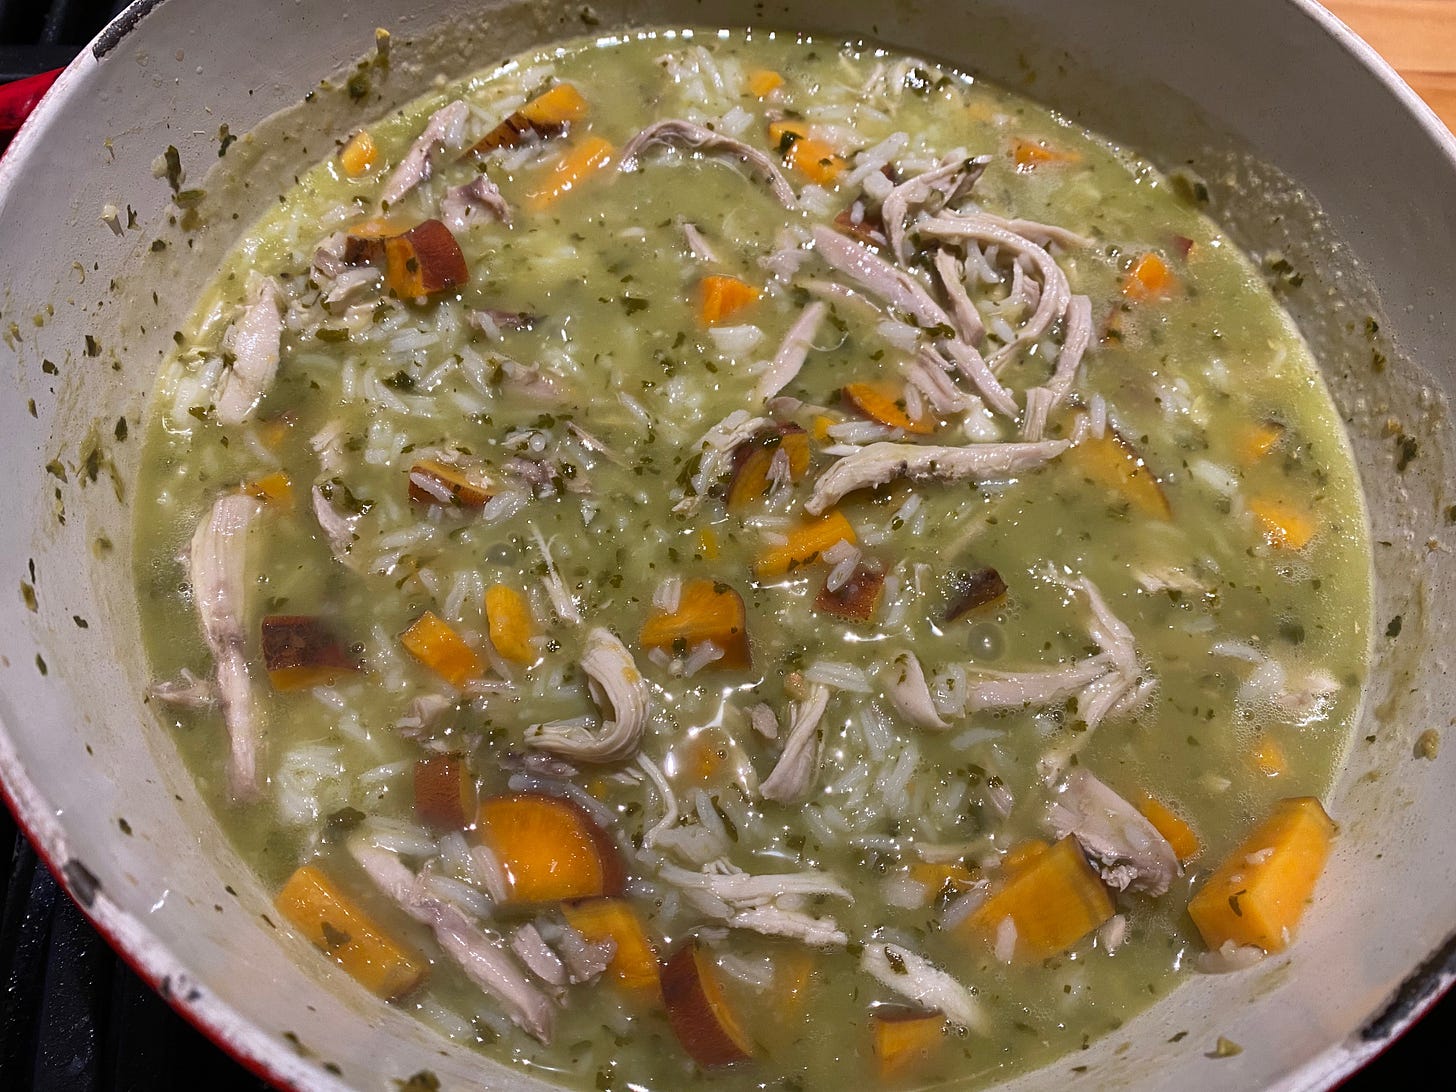 Close up of a pot of soup on a stove. The broth is green, with flecks of cilantro, lots of shredded chicken, and small cubes of sweet potato.